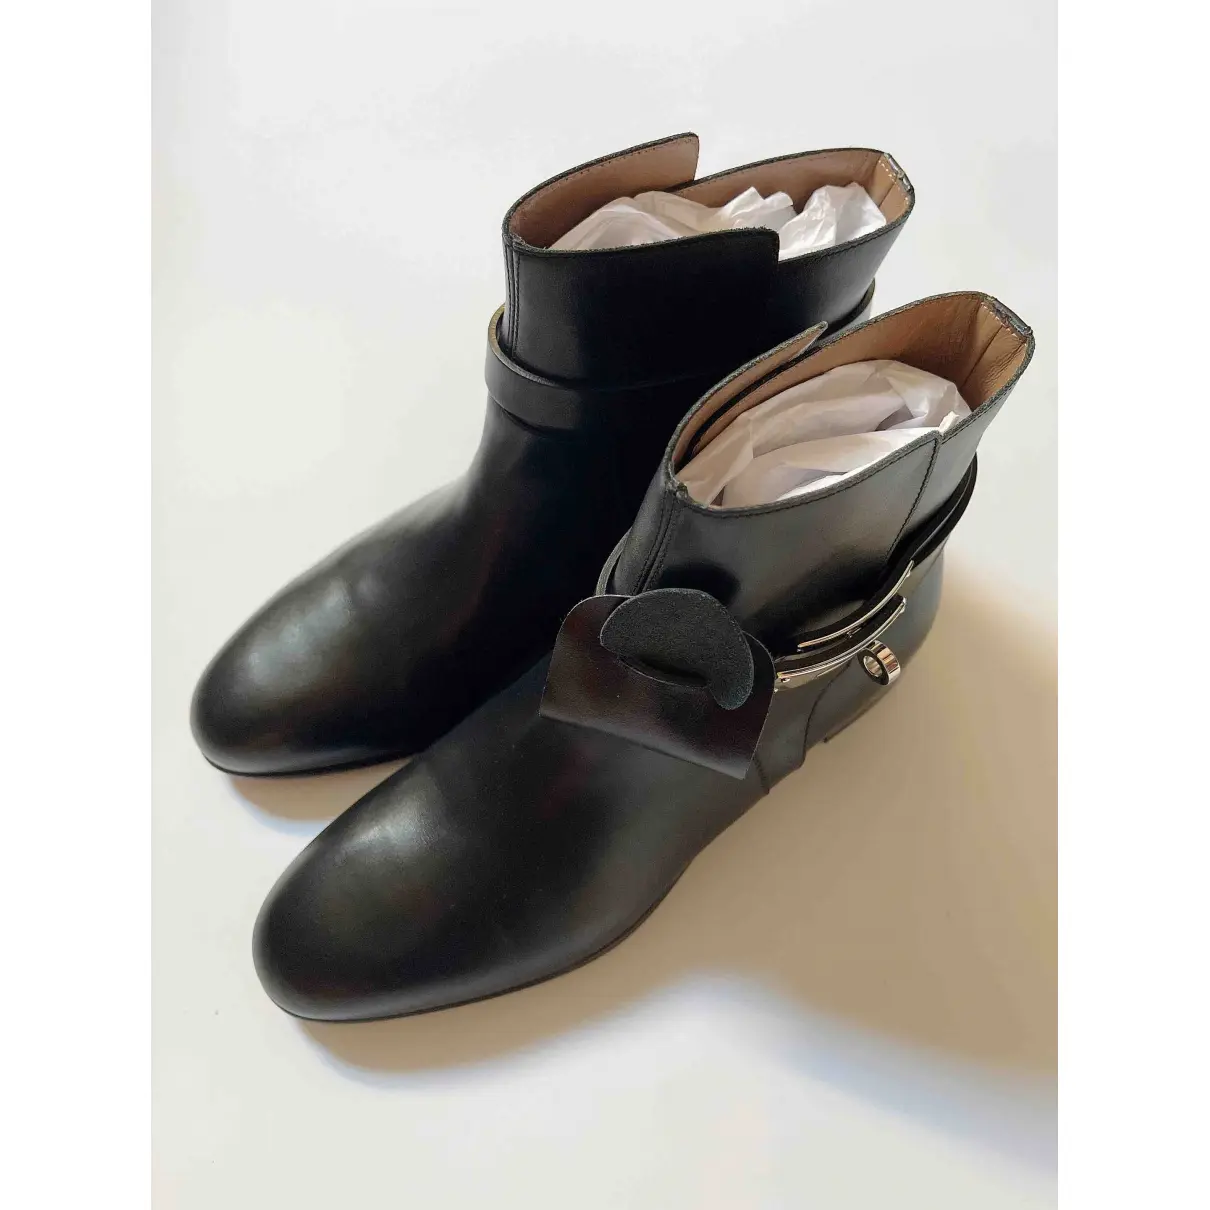 Buy Hermès Néo leather buckled boots online